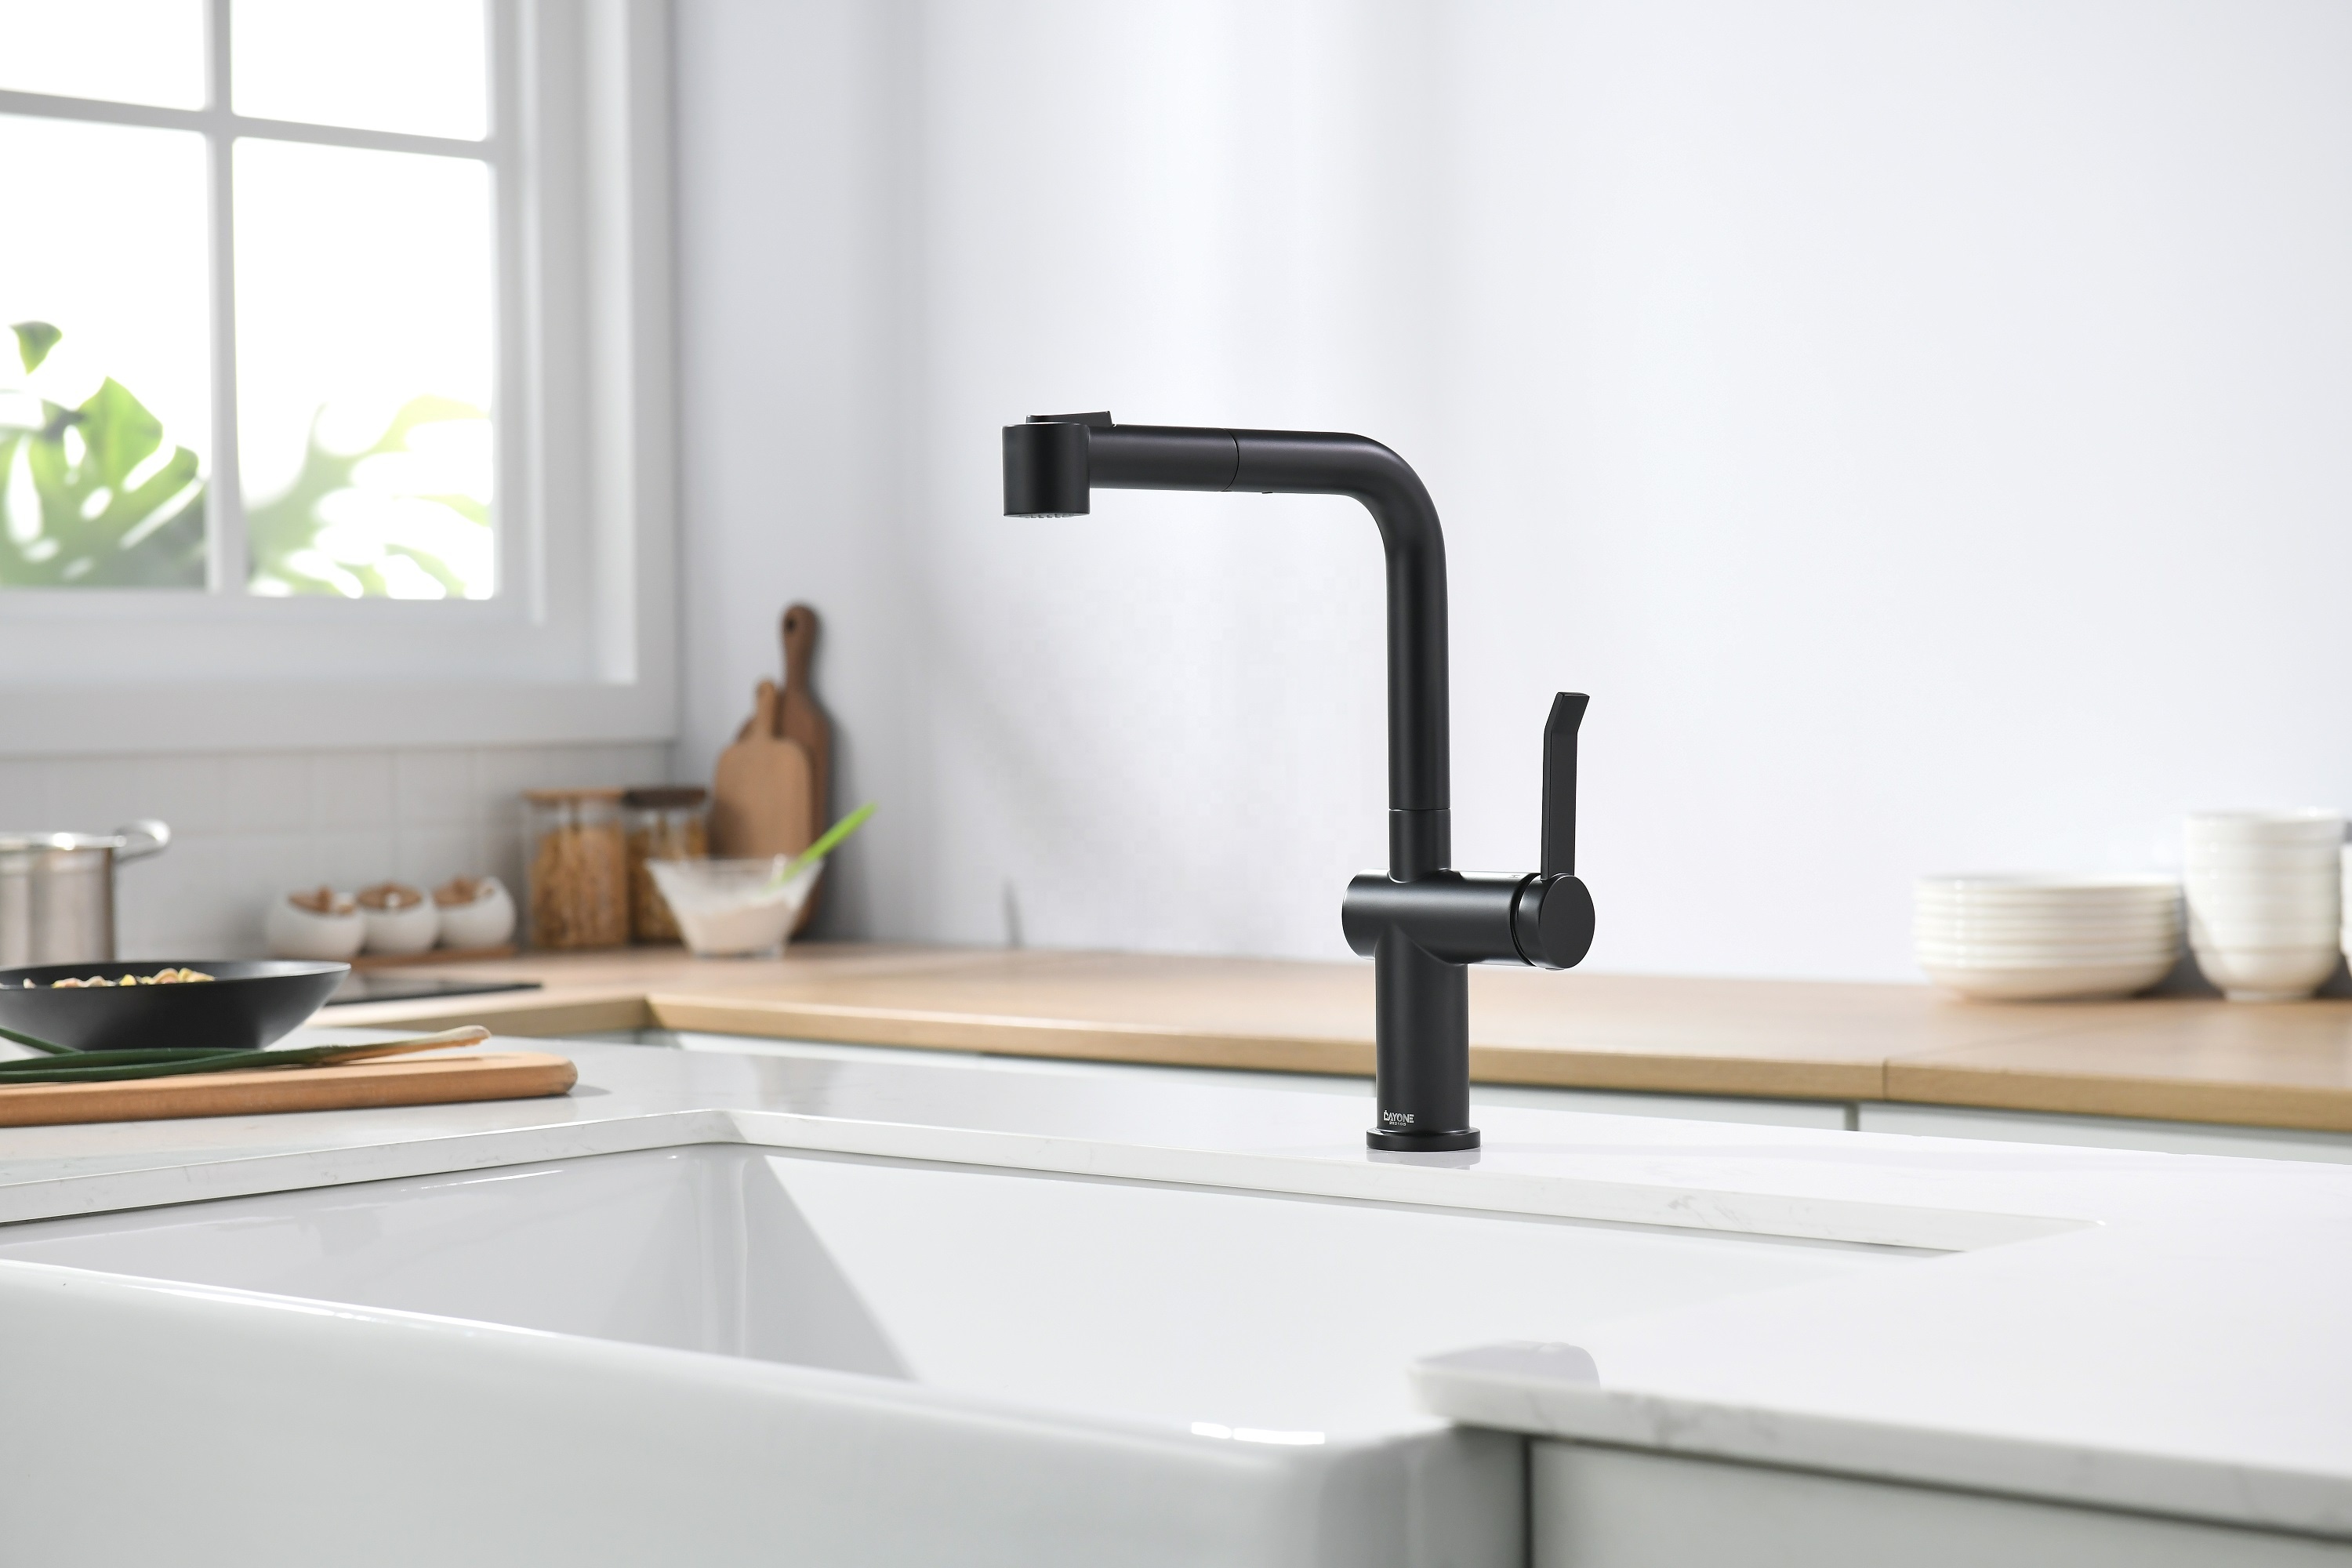 Deck Mounted Kitchen Faucet Pulled Types Black Kitchen Faucet Kitchen Sink Mixer Tap